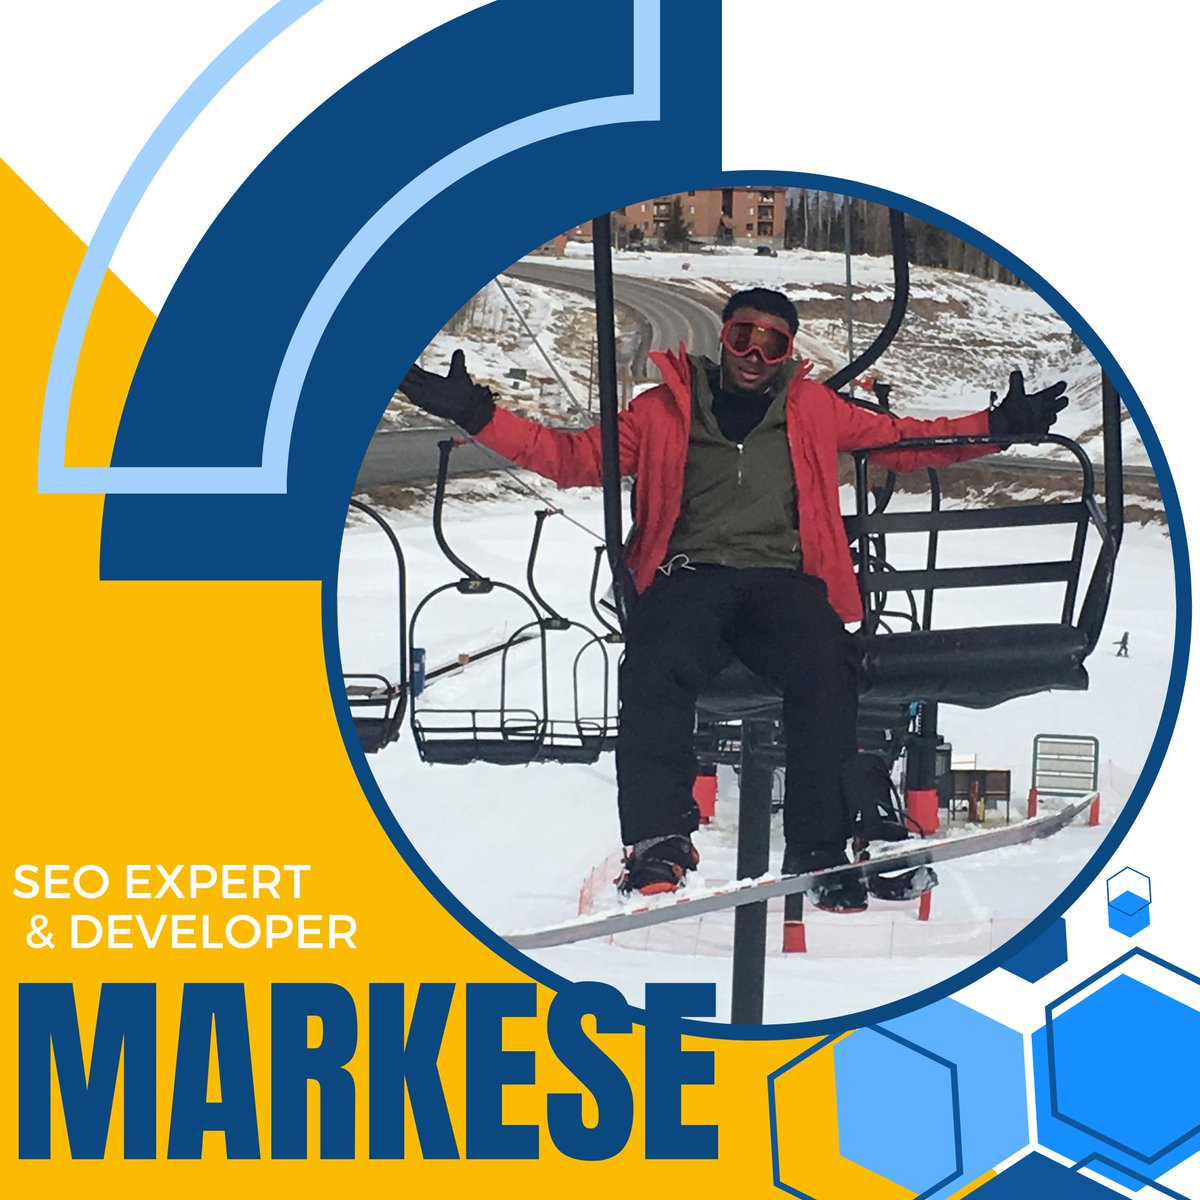 Meet Markese- our Webflow Dev & SEO Expert🔥

From snowboarding & biking, to being a family-man, to co-owning a restaurant & engaging in the Las Vegas tech community, Kese lives his life to the fullest 💯

#beltcreative #TeamMemberTuesday #Webflow #WebflowSEO #WebflowDevelopment